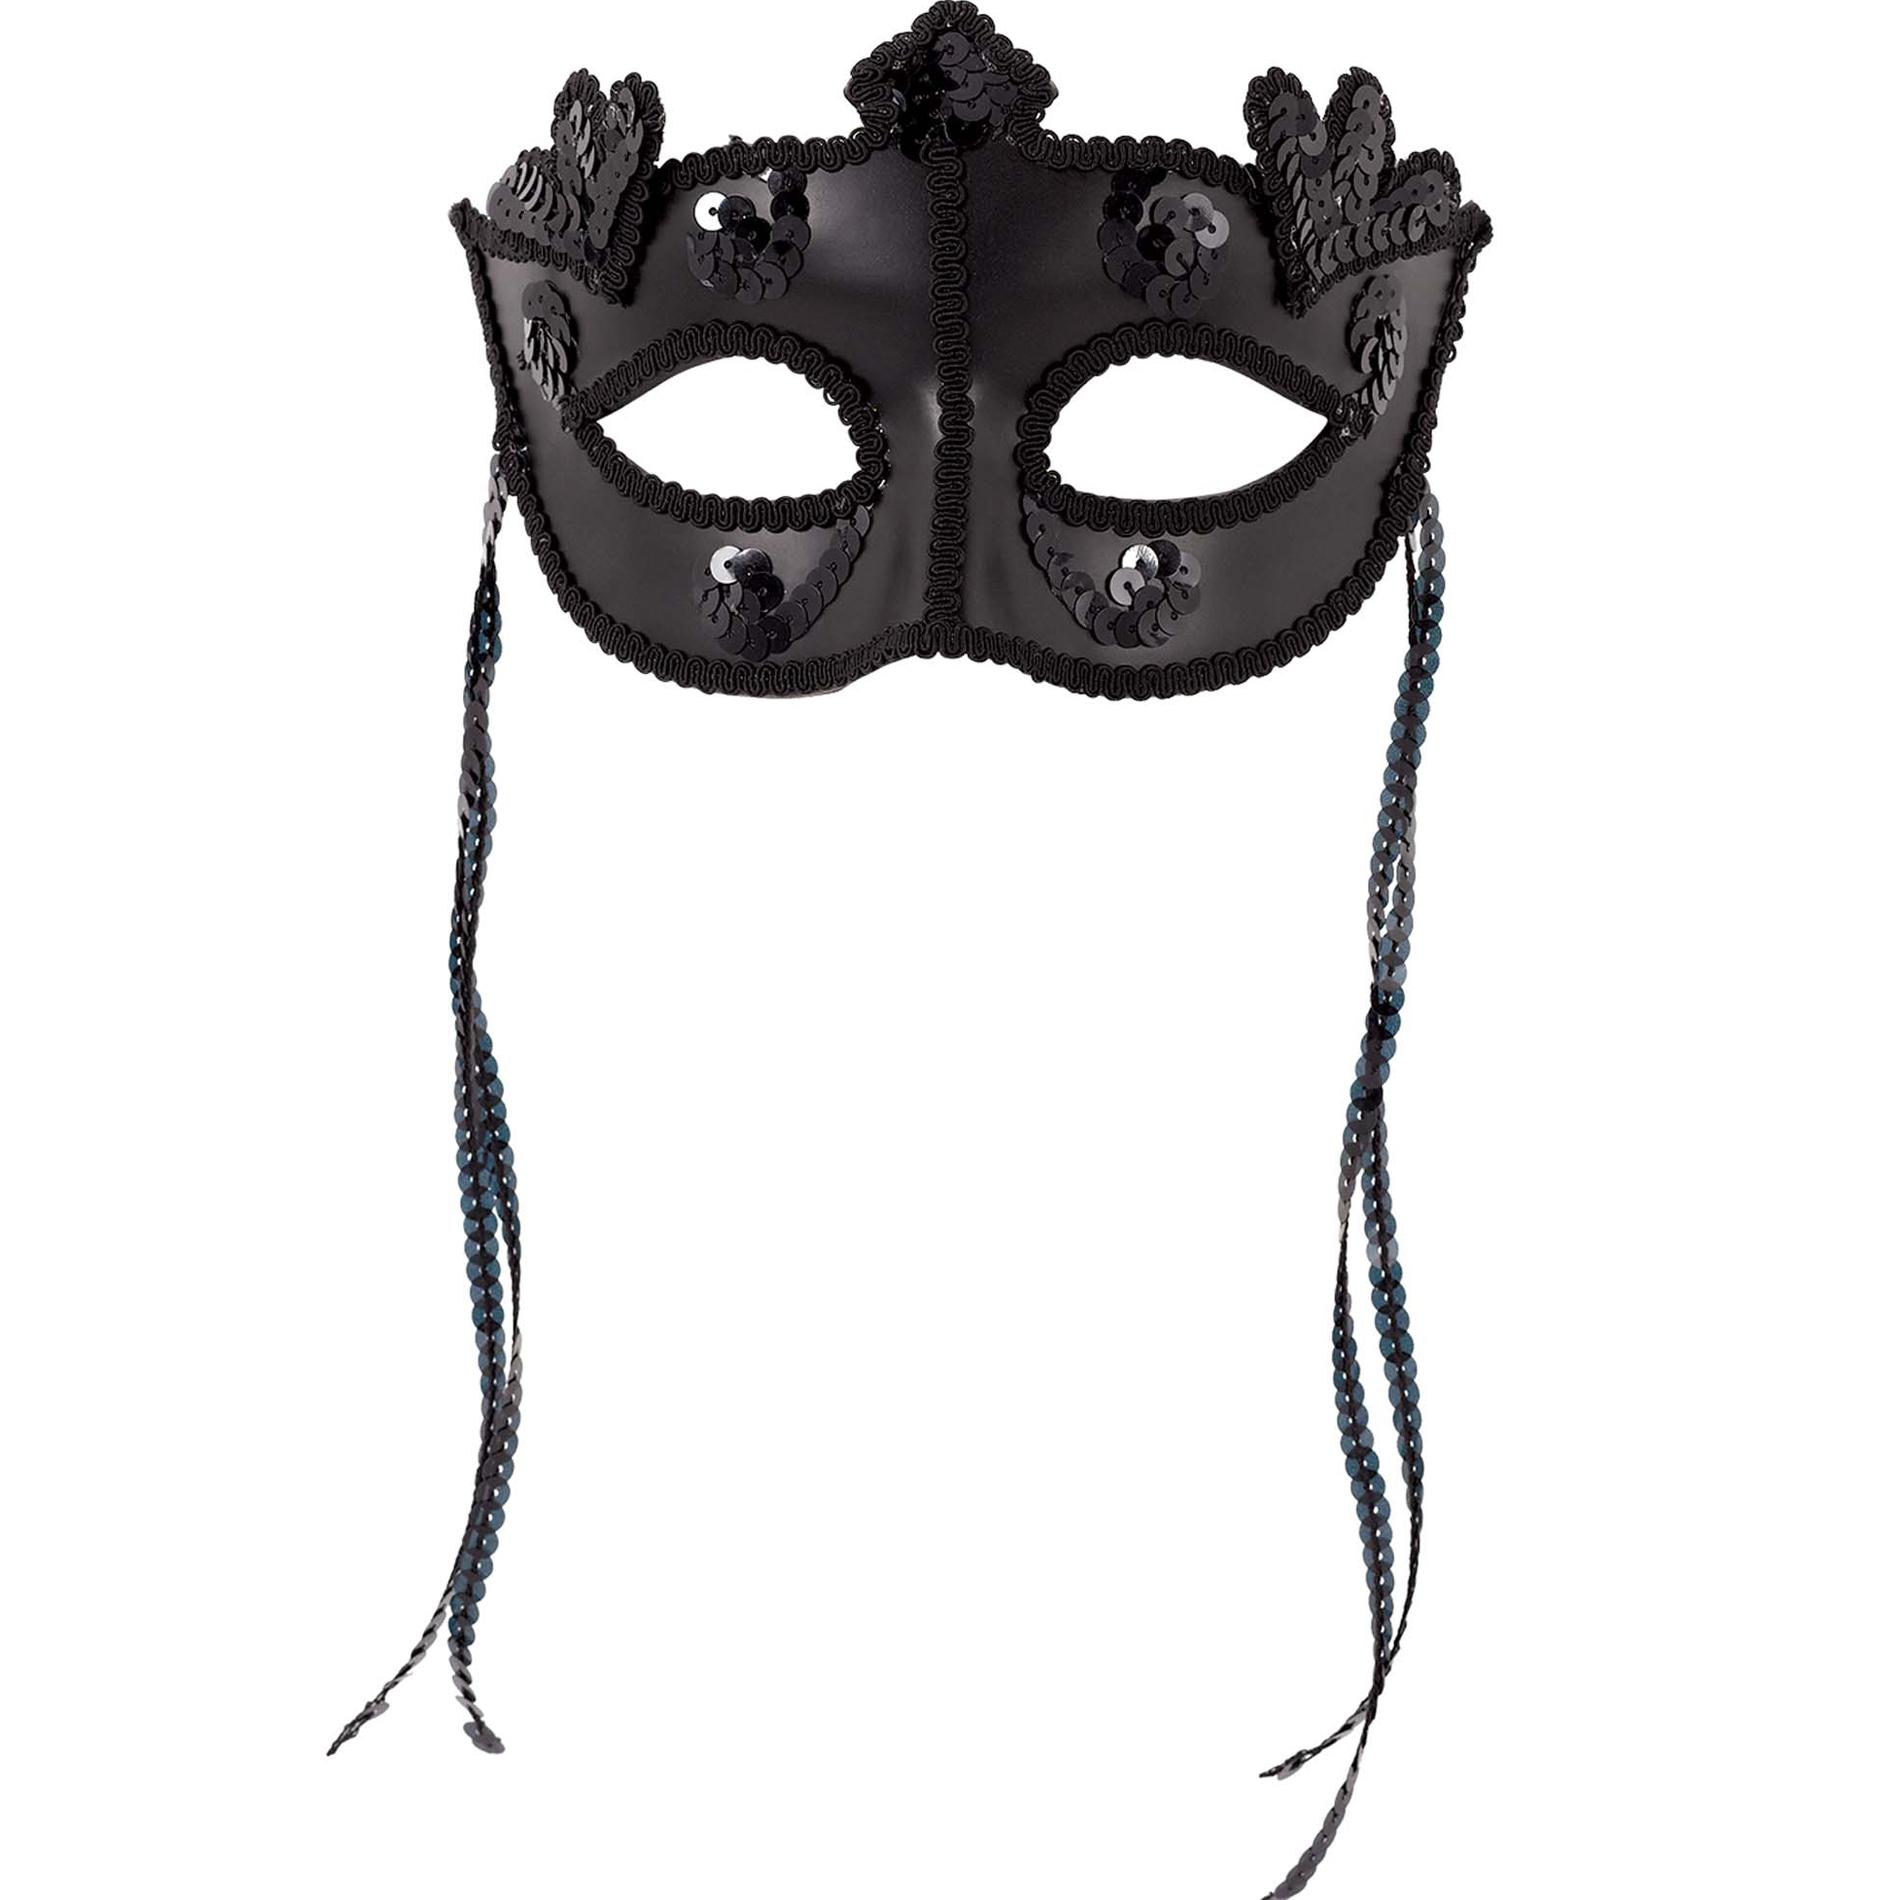 A Night In Disguise Black Fabric Mask Costumes & Apparel - Party Centre